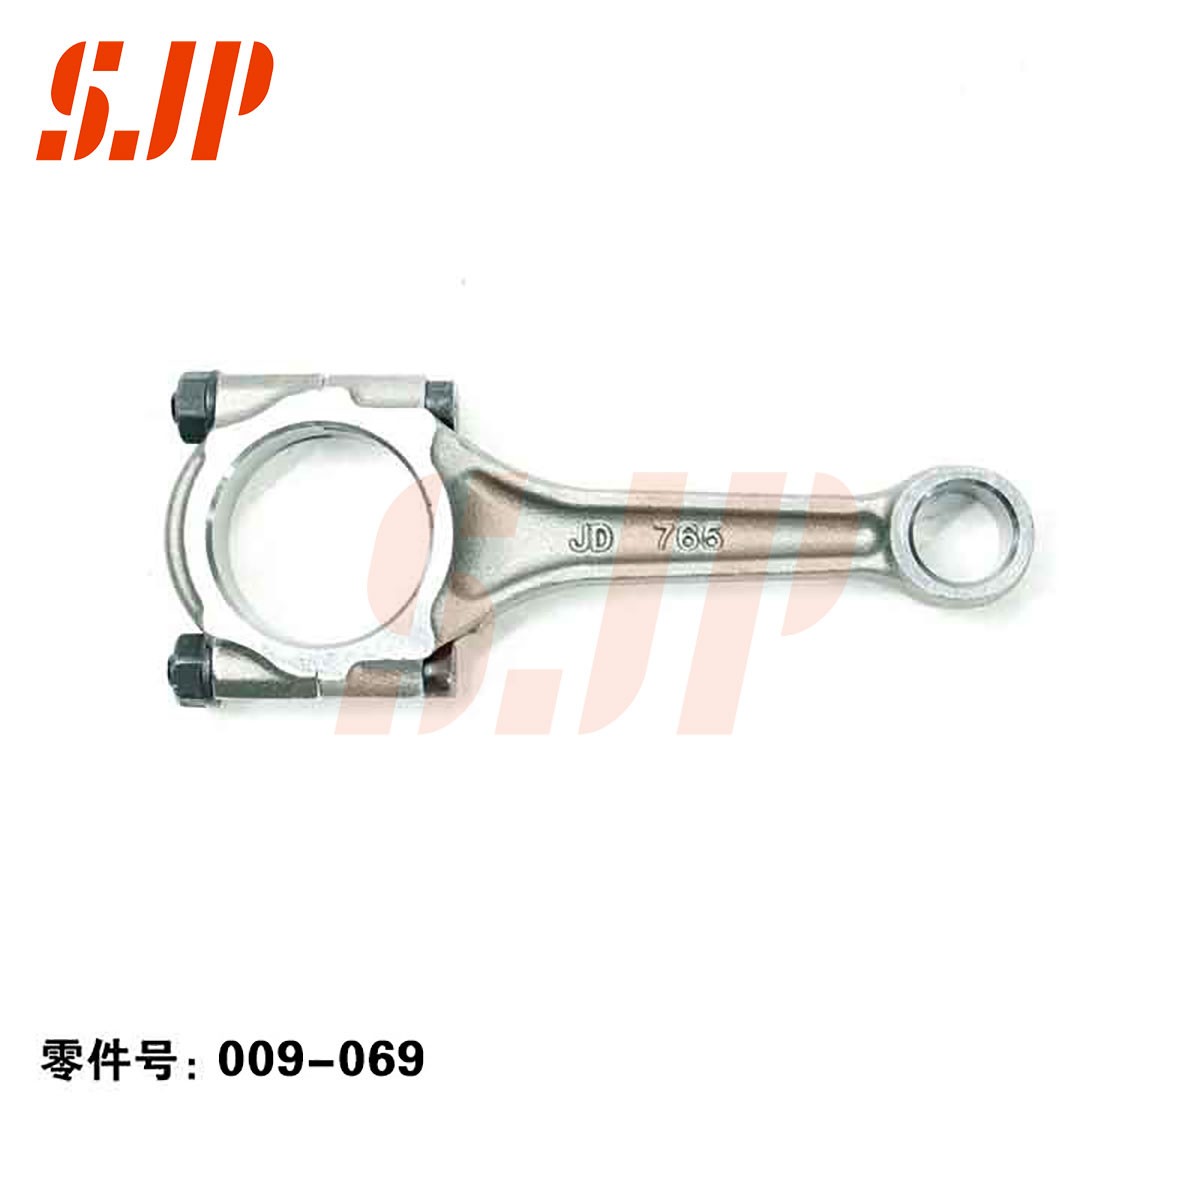 SJ-009-069 Connecting Rod For Chery 372/472